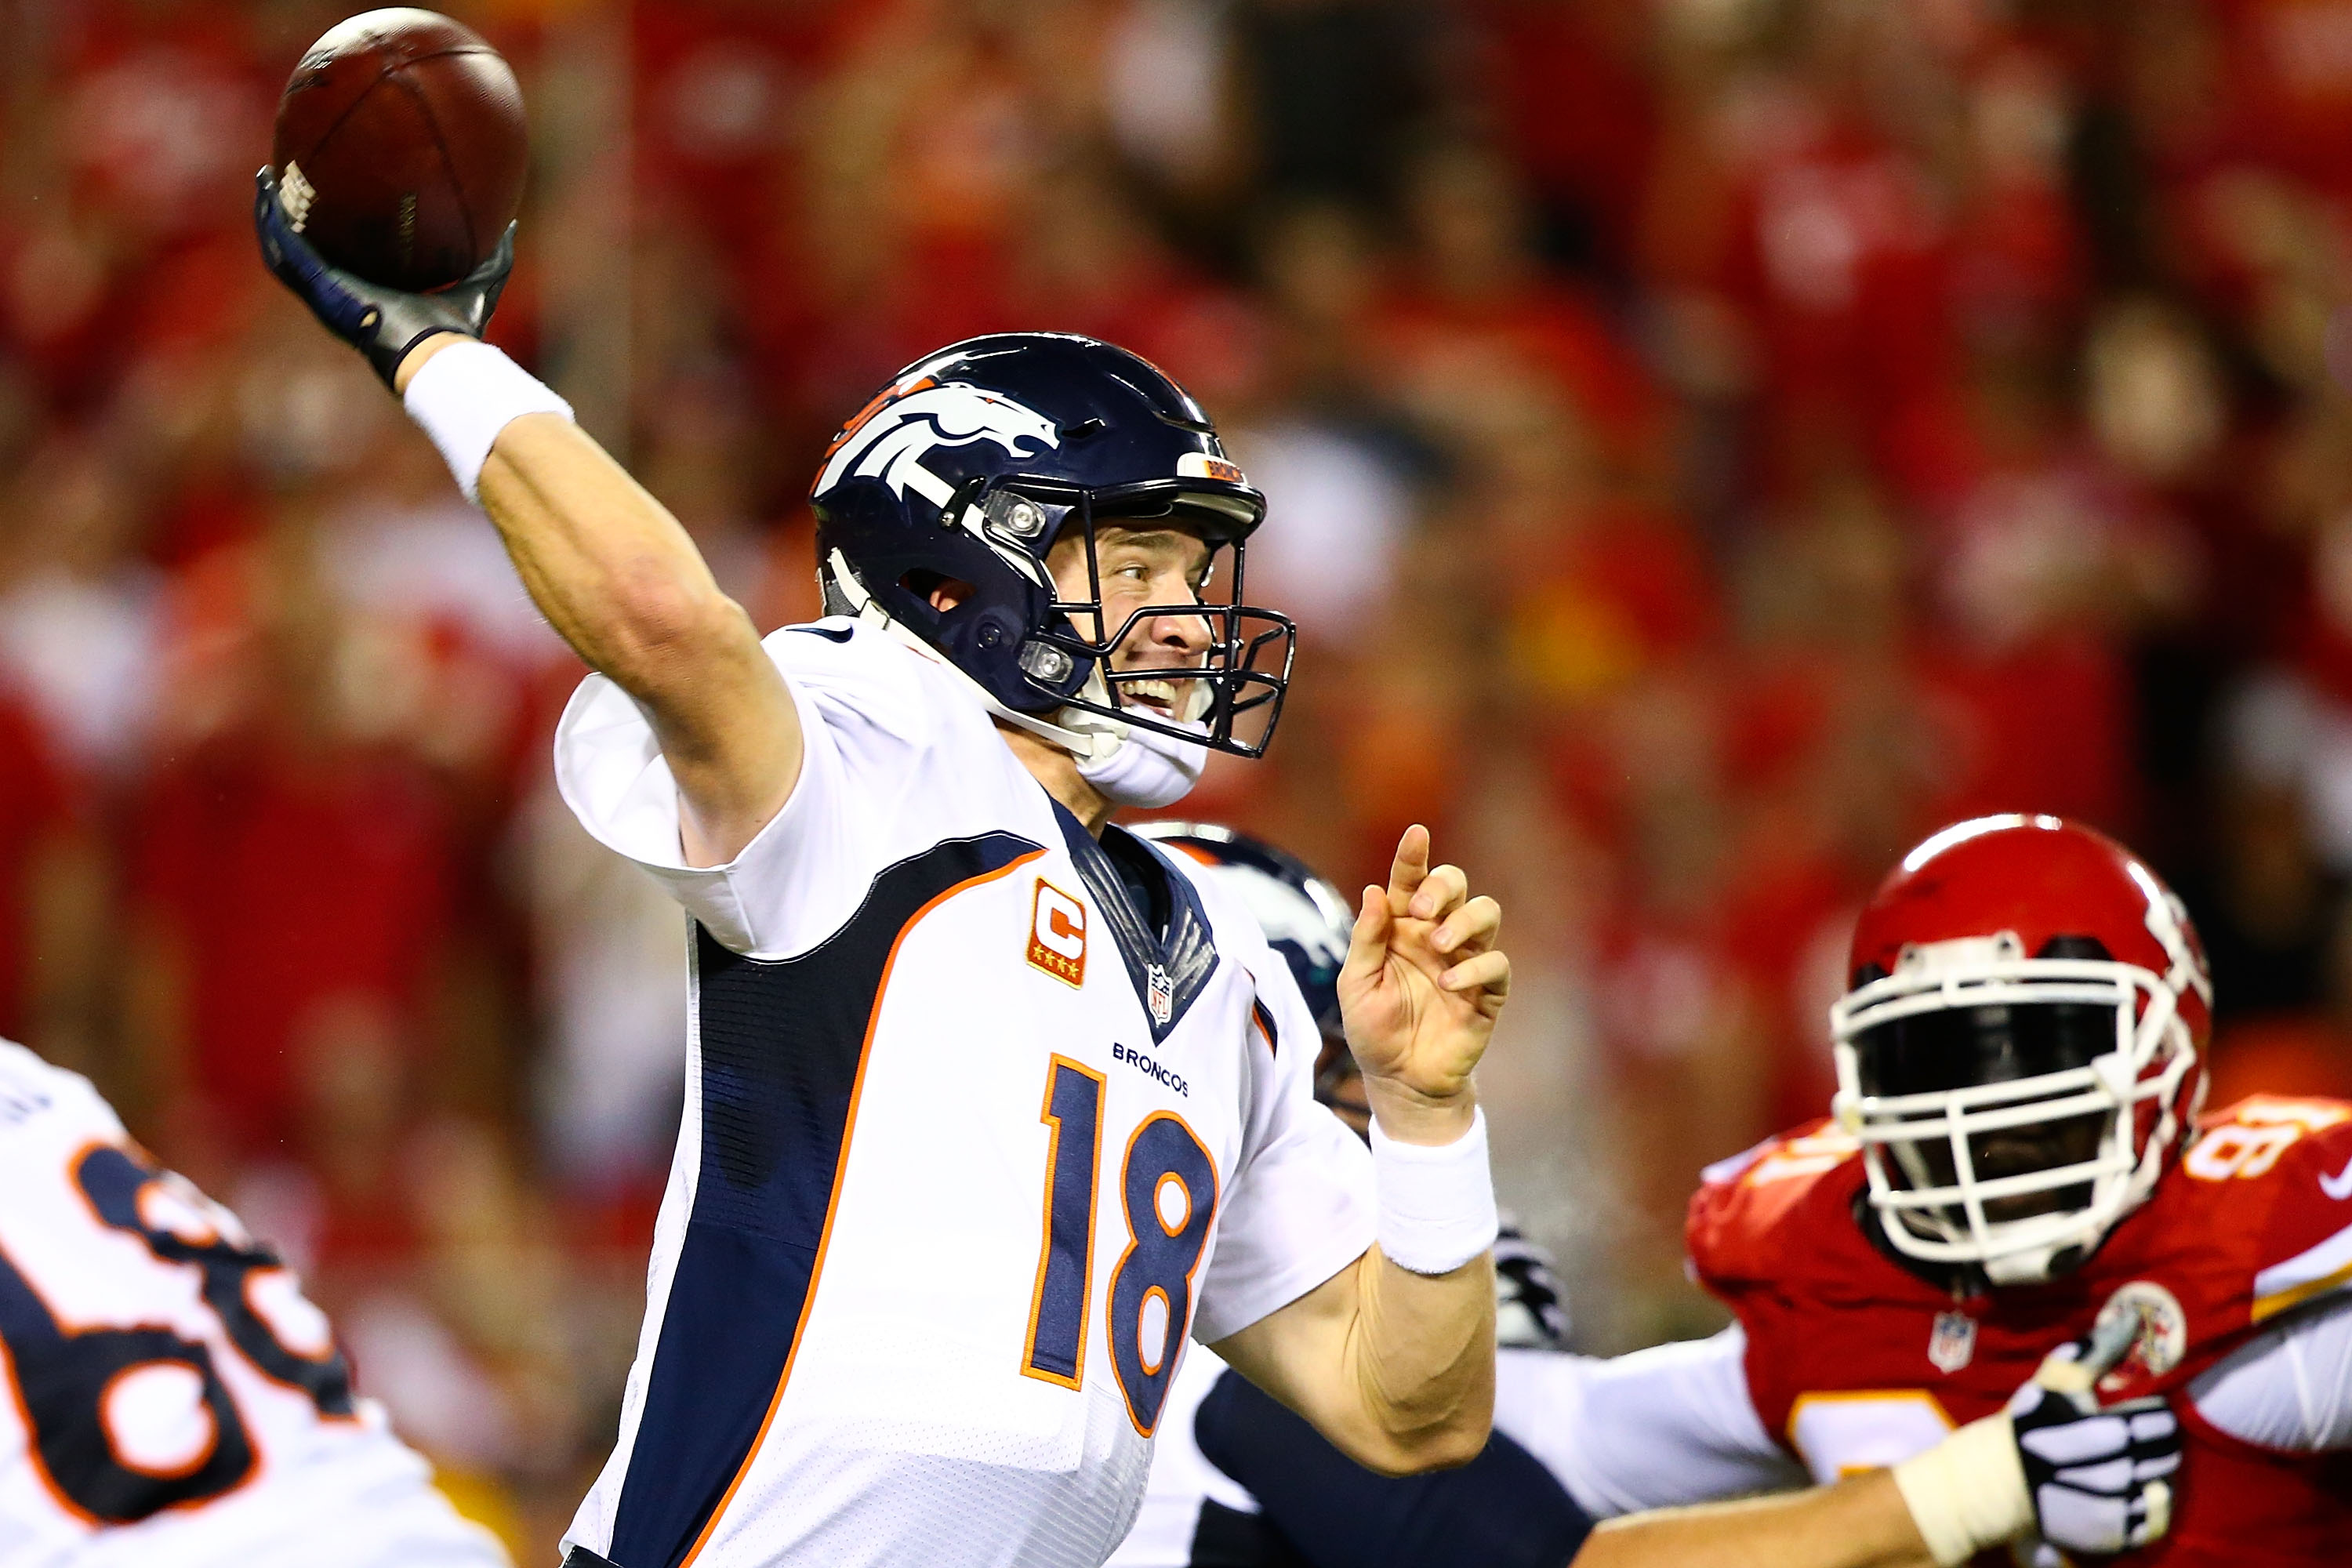 Peyton Manning #18 of the Denver Broncos throws a pass during the game against the Kansas City Chiefs at Arrowhead Stadium on Sept. 17, 2015 in Kansas City, Missouri (Ronald Martinez—Getty Images)